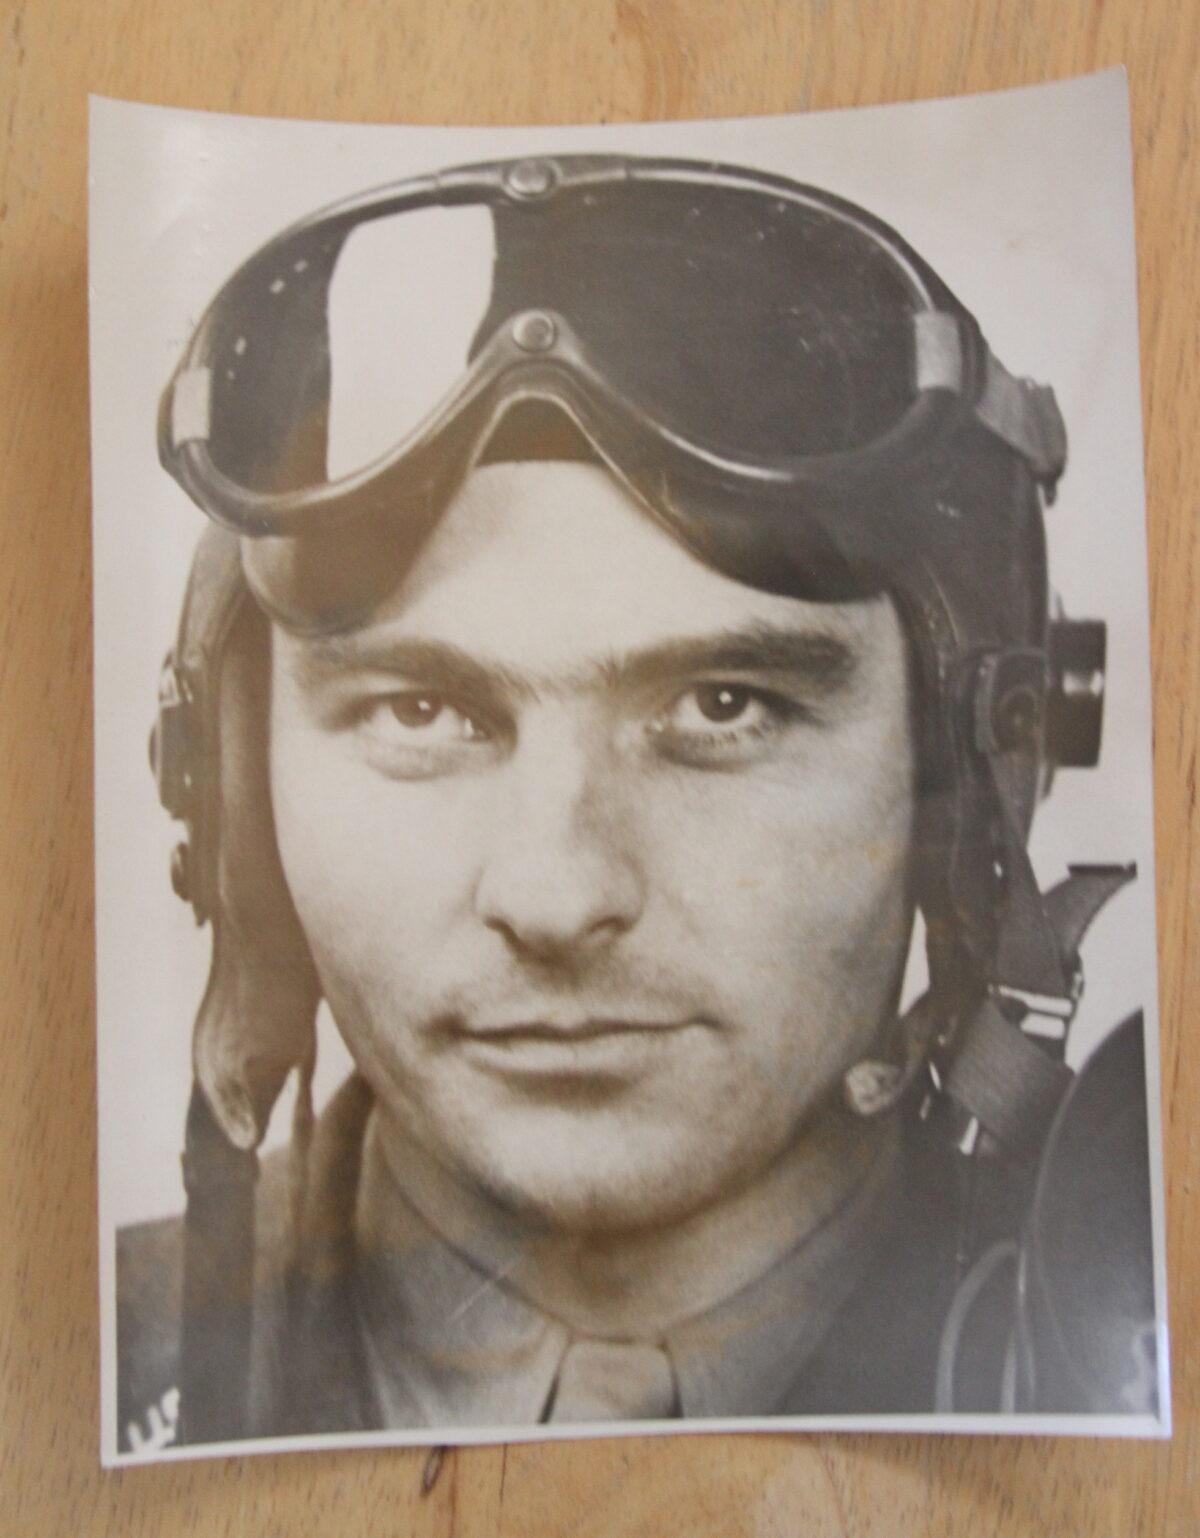 A photo of Ed Reeder as a young pilot. (Brad Jones/The Epoch Times)